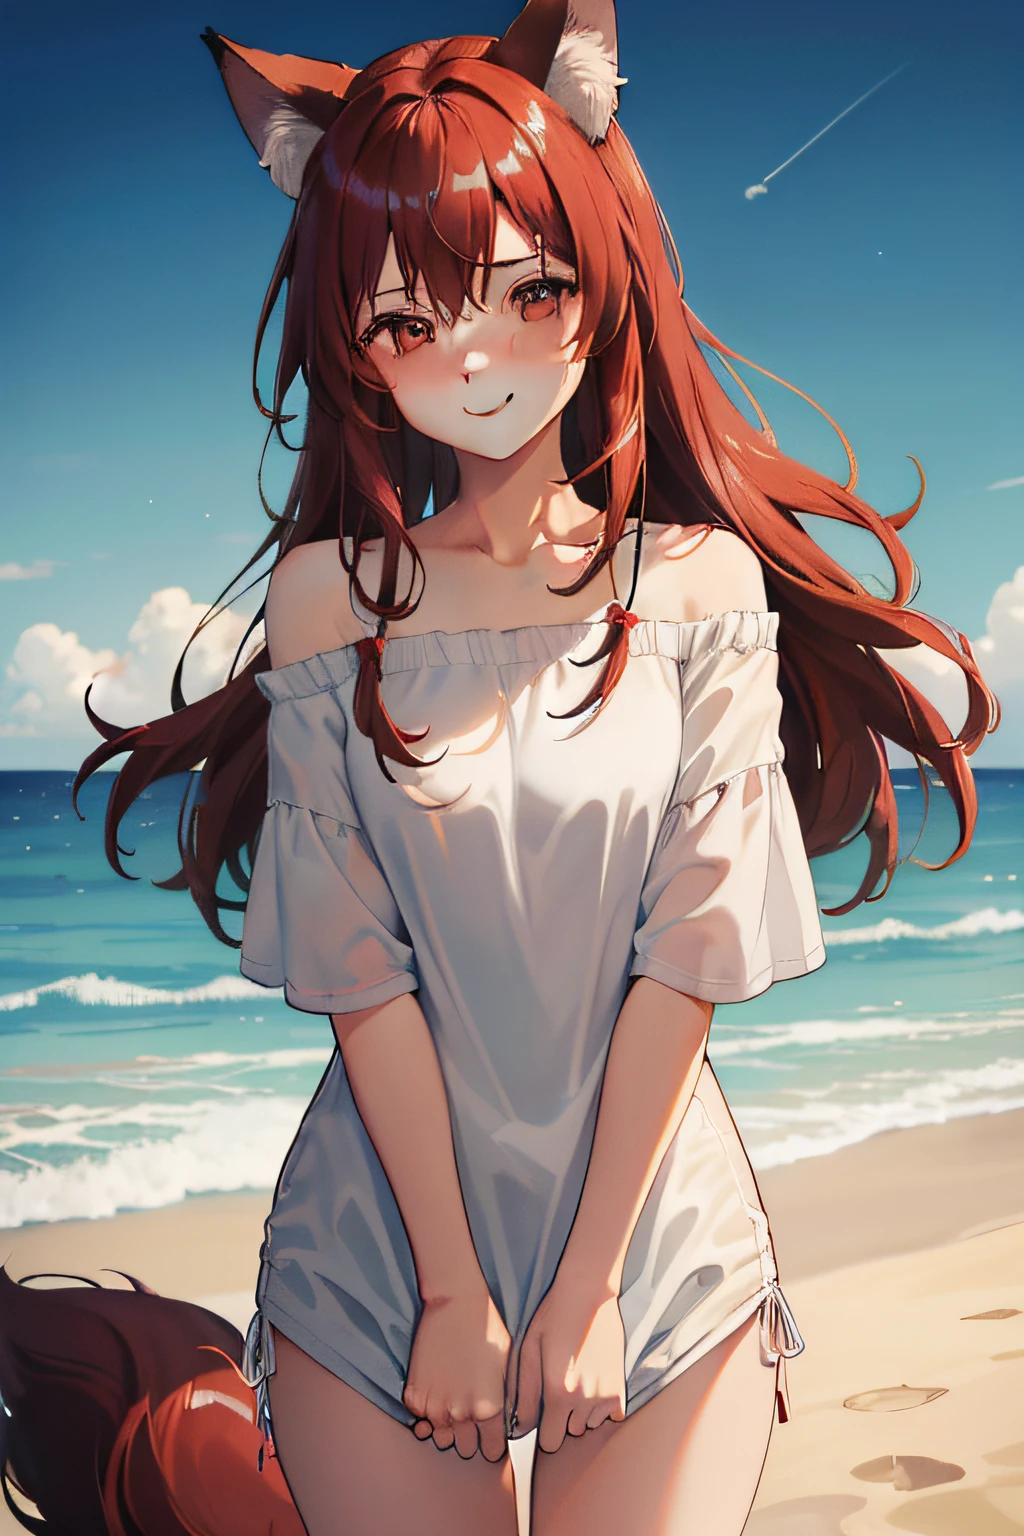 (((best quality, high resolution, masterpiece))) shirt tug, laid down on the beach, beach, sea, long hair, strong wind, shorts, wavy hair, red hair, translucent clothes, (cat smile), fox ears, fox tail, cute expression, detailed face, detailed eyes, off the shoulder clothing, night sky, raining stars, blushed, embarassed